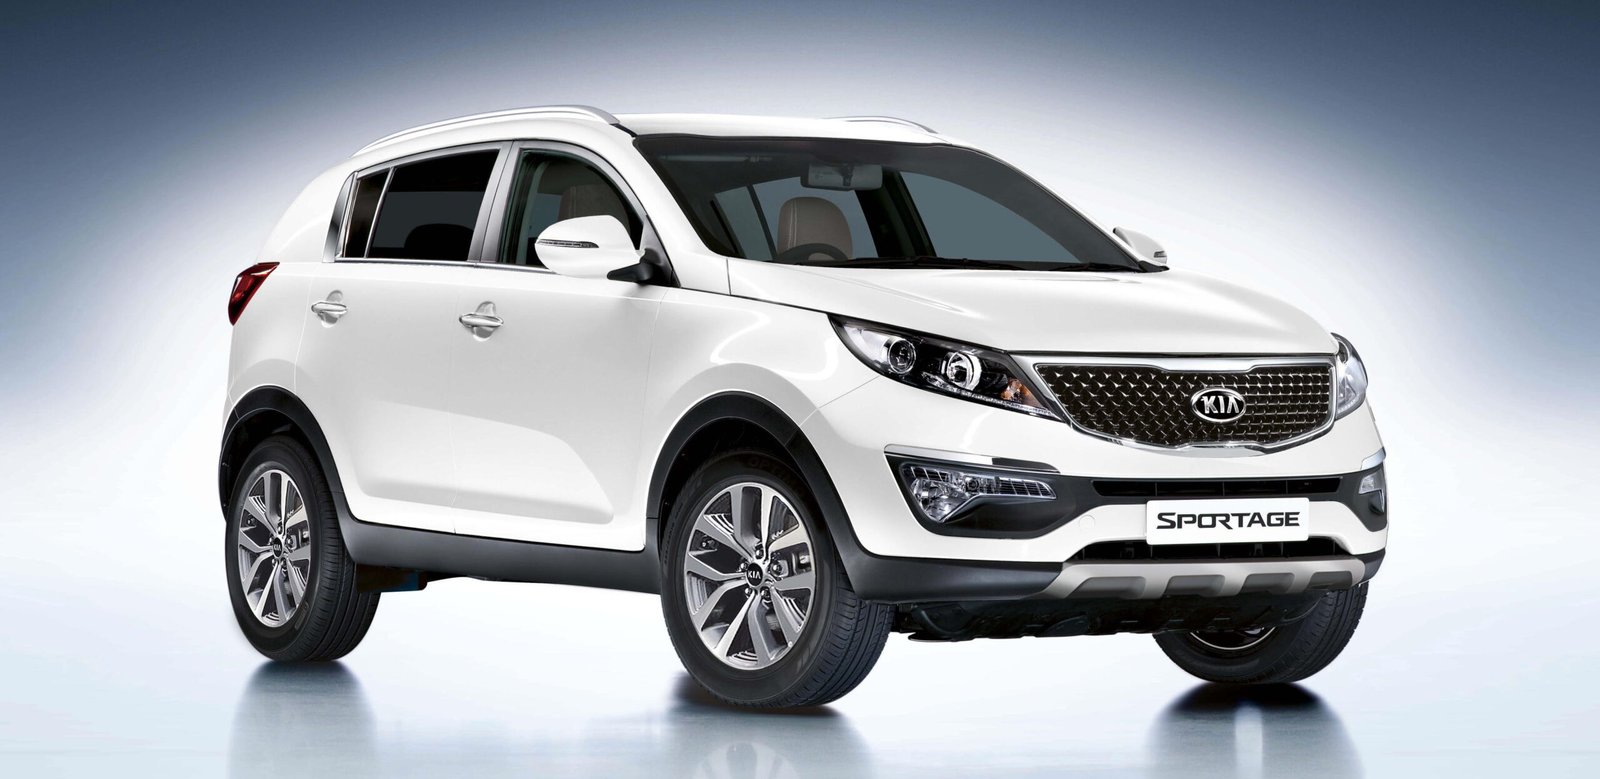 Kia Used Cars: How to Find the Best Deals in Melbourne